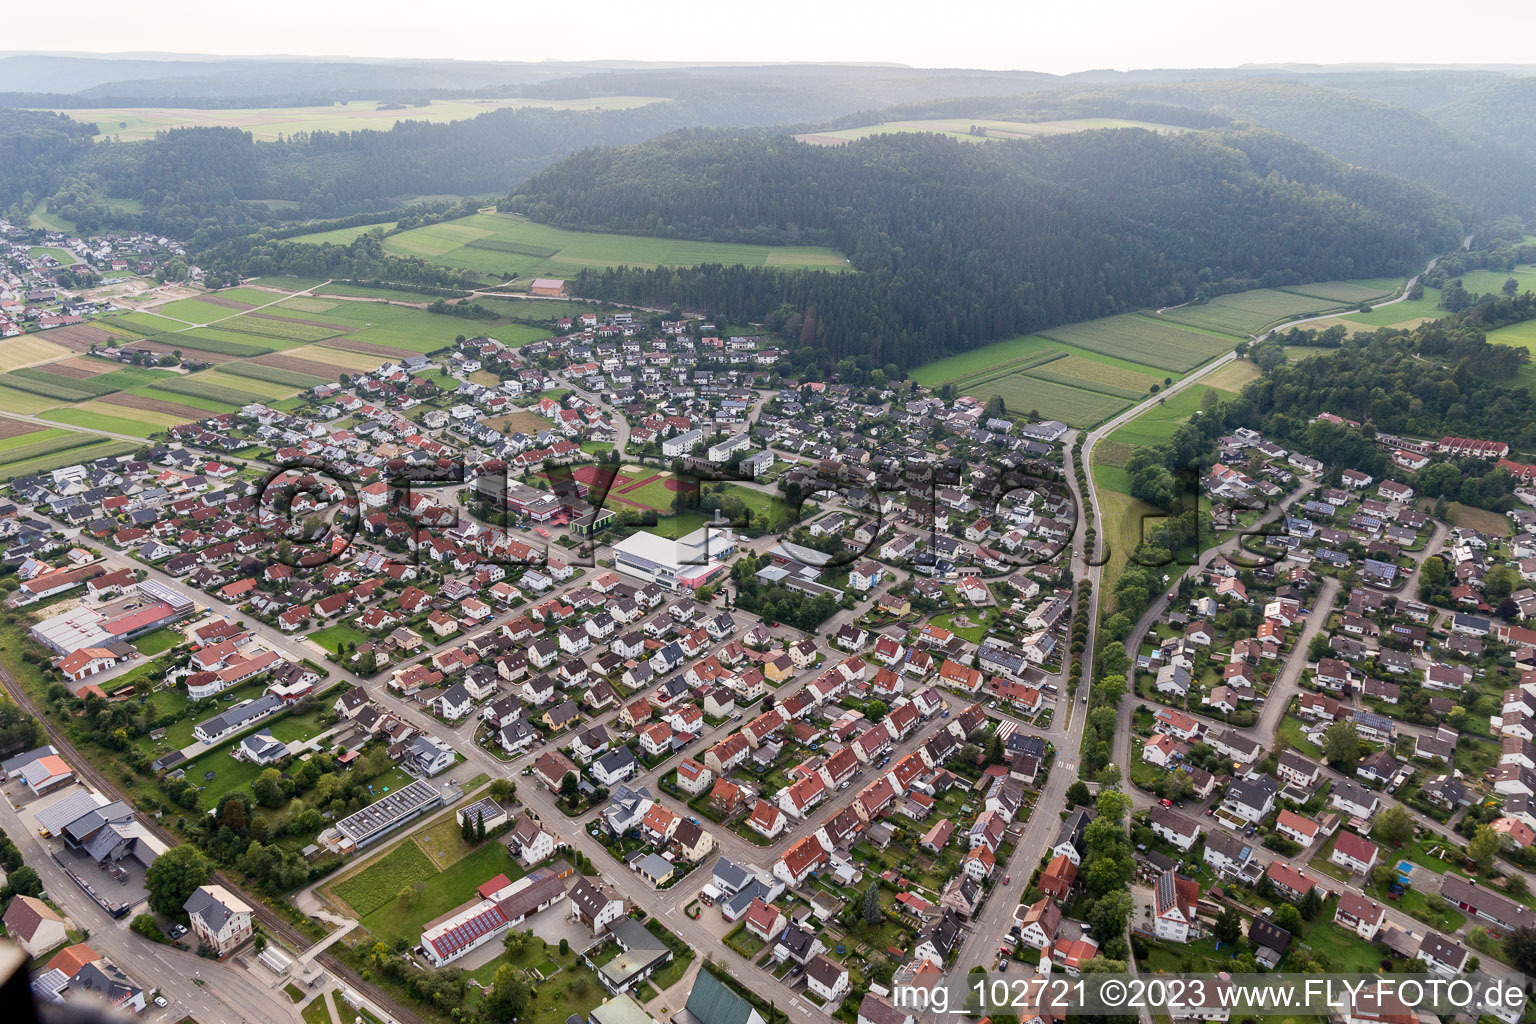 Mühlheim an der Donau in the state Baden-Wuerttemberg, Germany seen from above